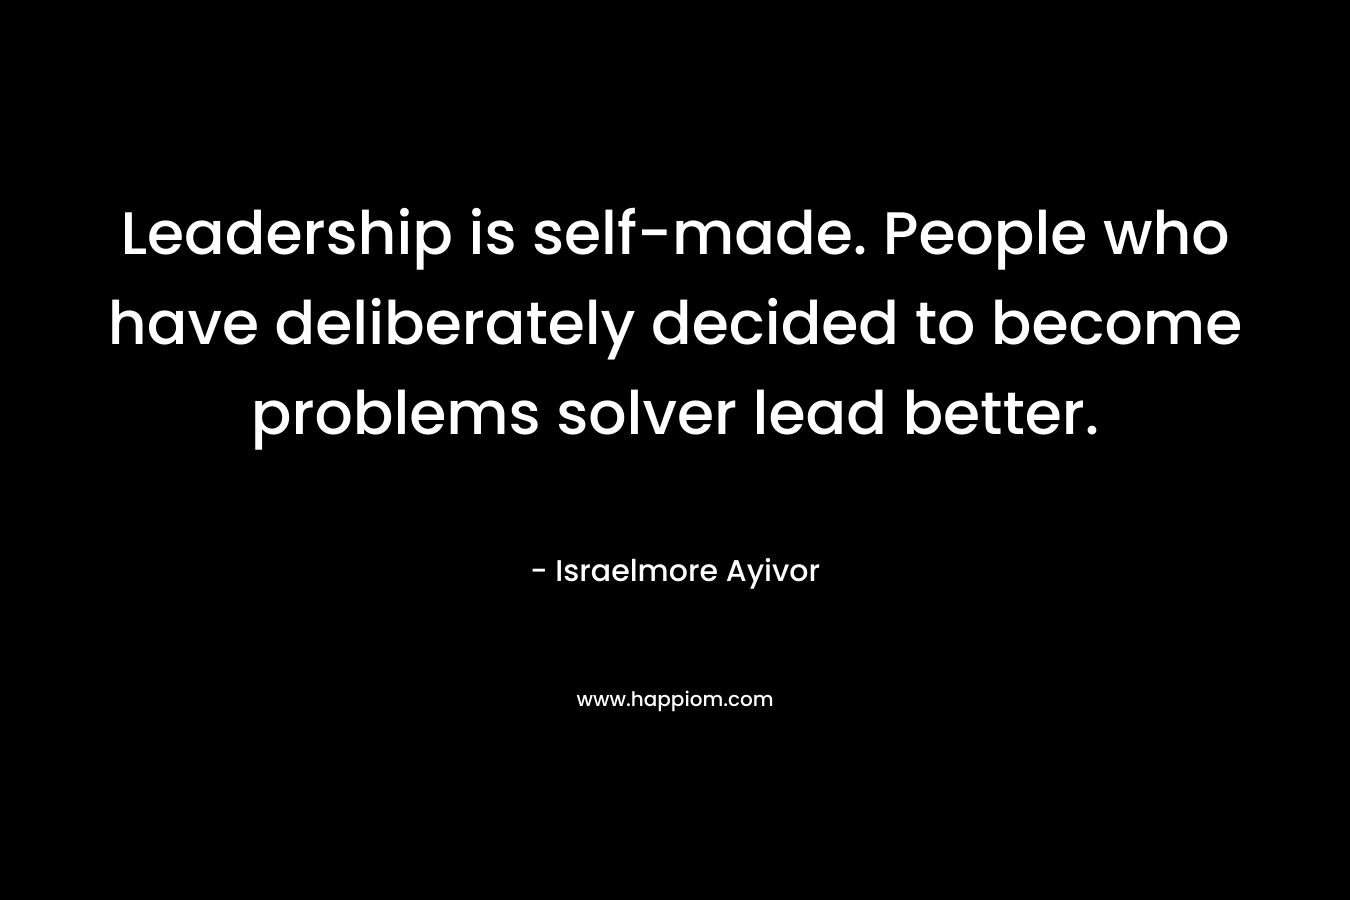 Leadership is self-made. People who have deliberately decided to become problems solver lead better.